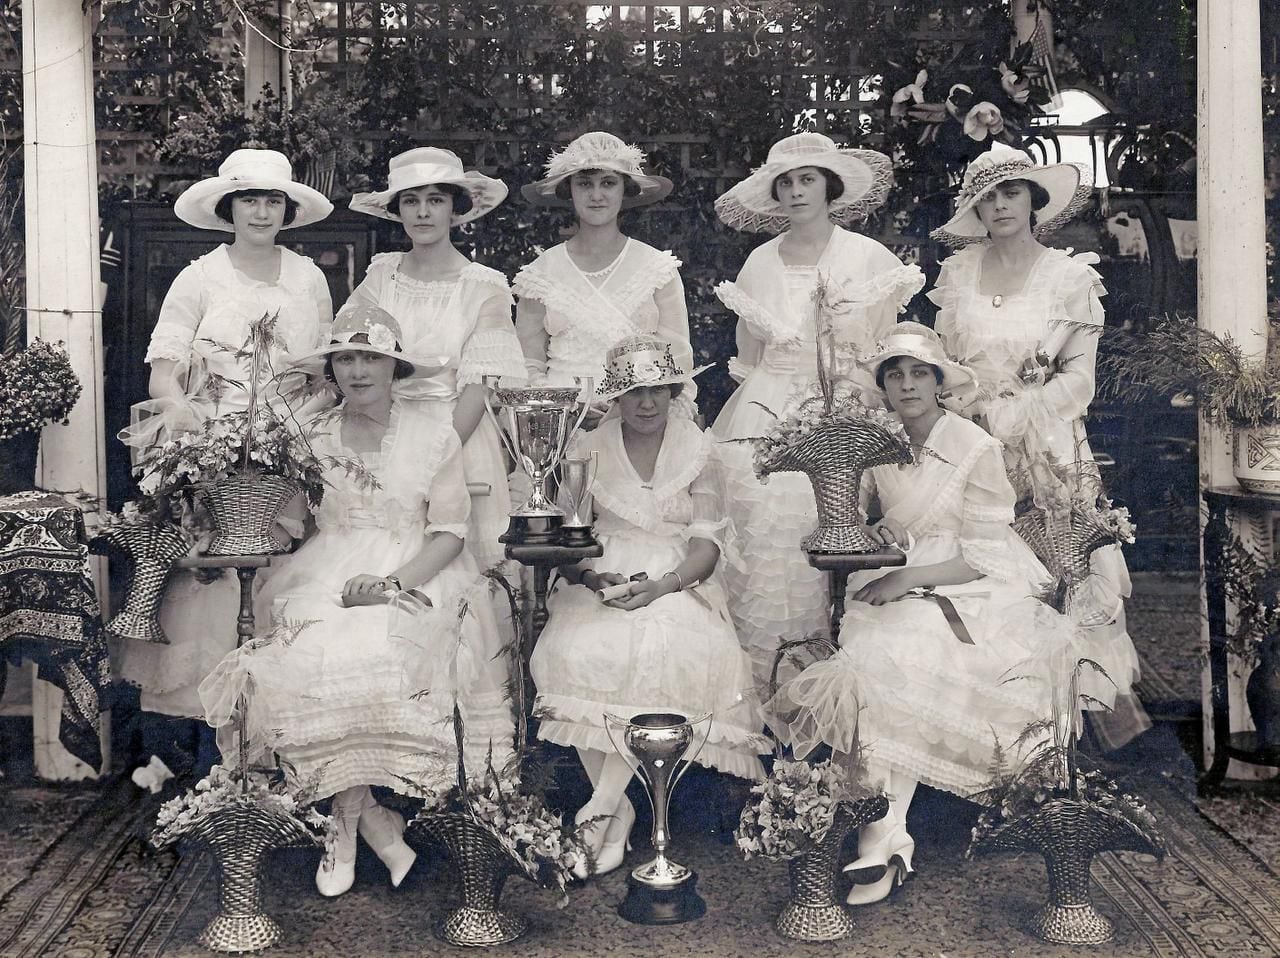 
Graduating in a white dress was tradition at the Hockaday School in 1918 for these young...